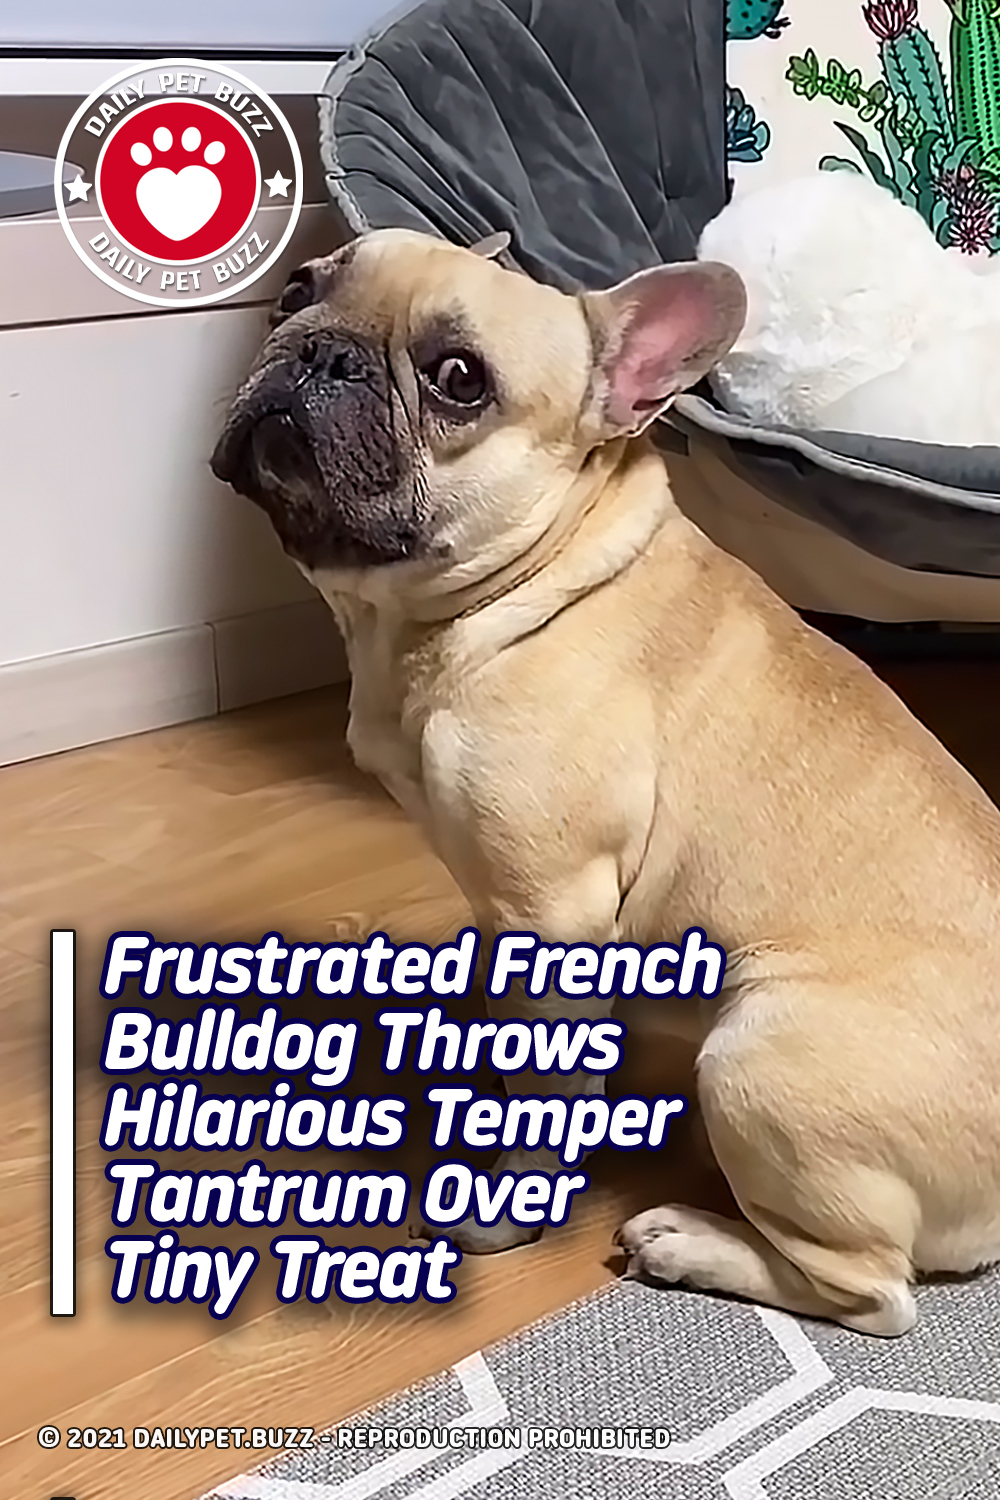 Frustrated French Bulldog Throws Hilarious Temper Tantrum Over Tiny Treat